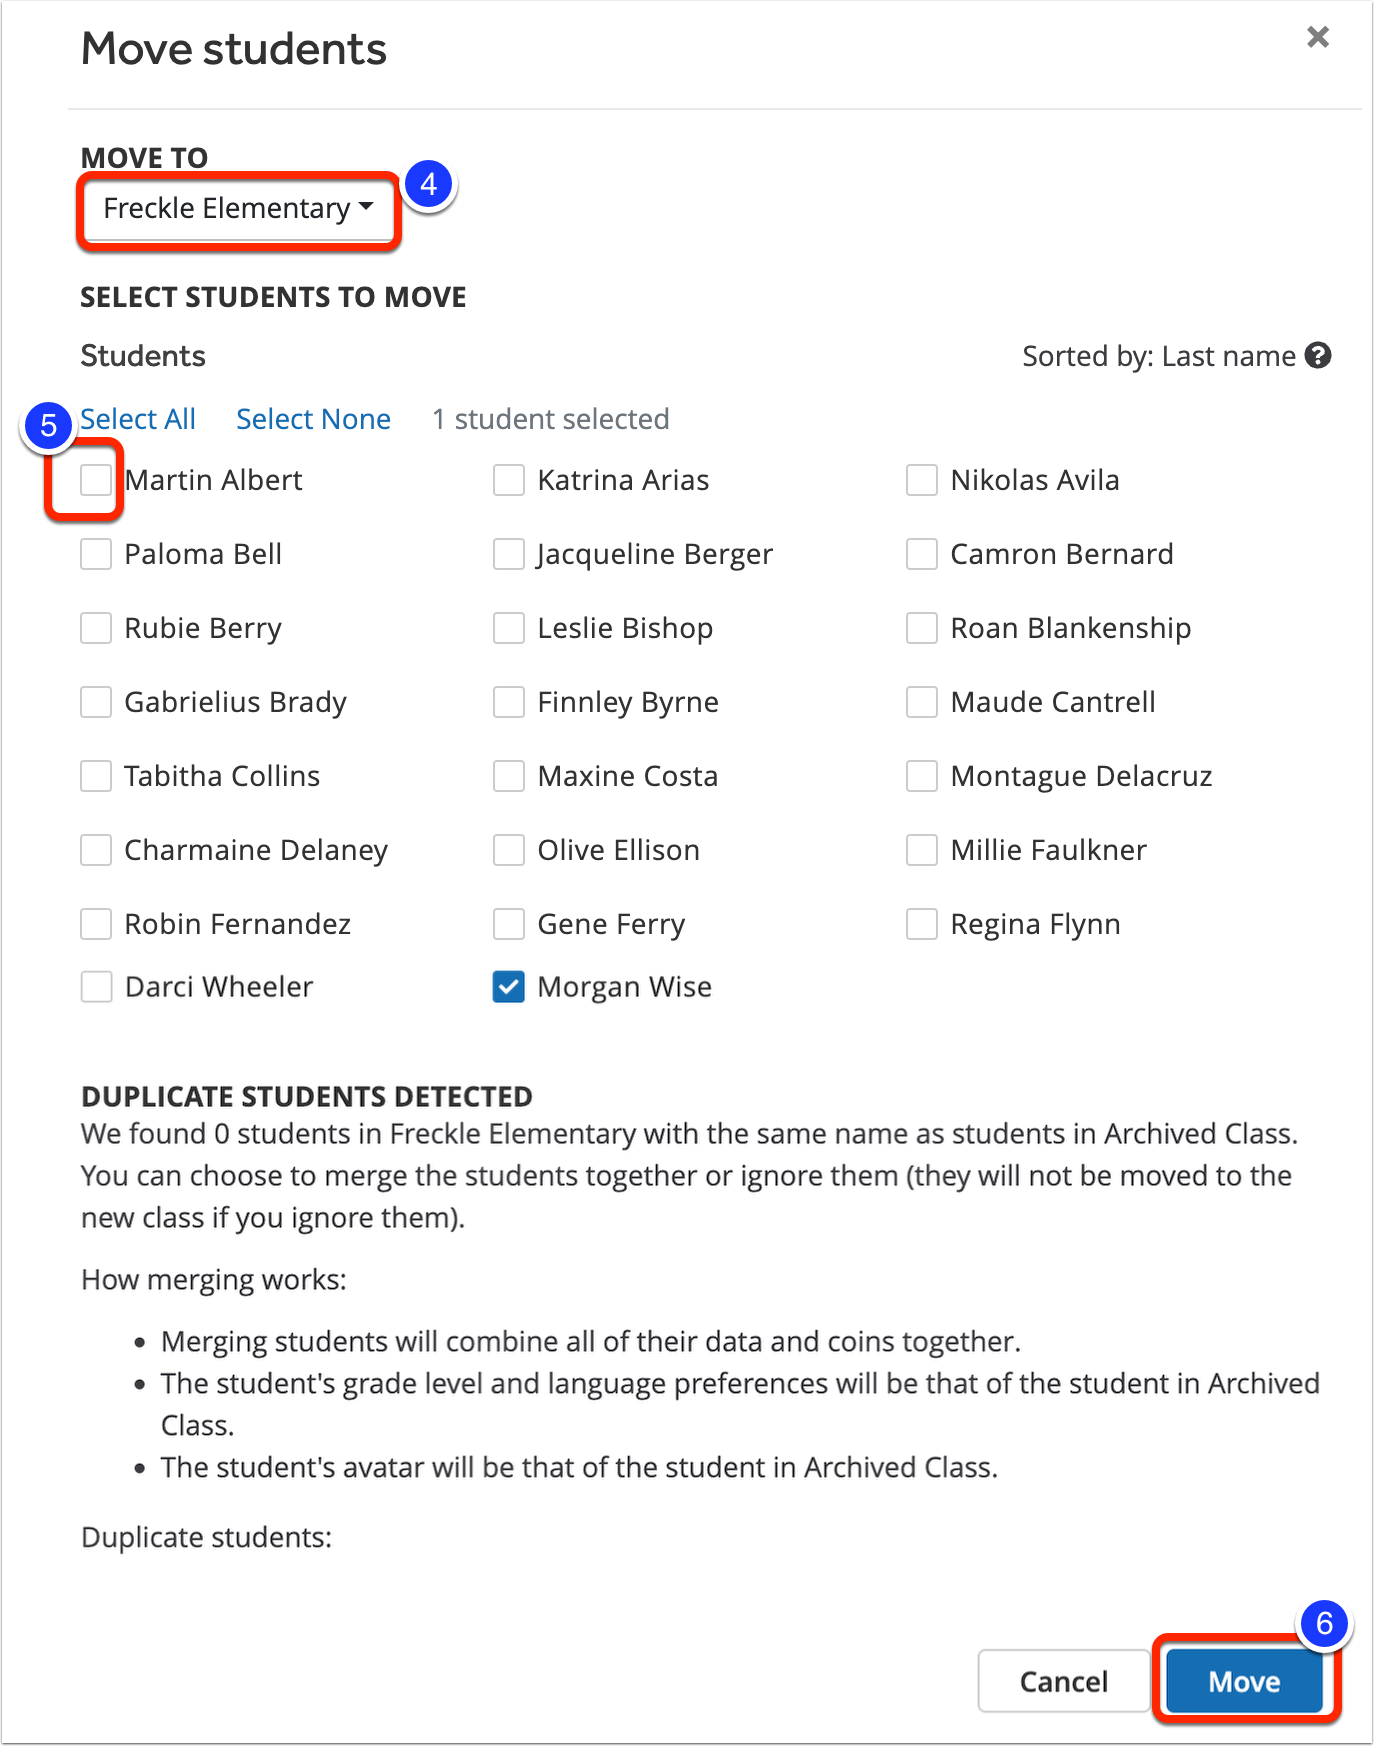 The Move To drop-down list, where you can choose a class. The students that can be moved are listed alphabetically; each has a checkbox by their name. The Move button is at the bottom.